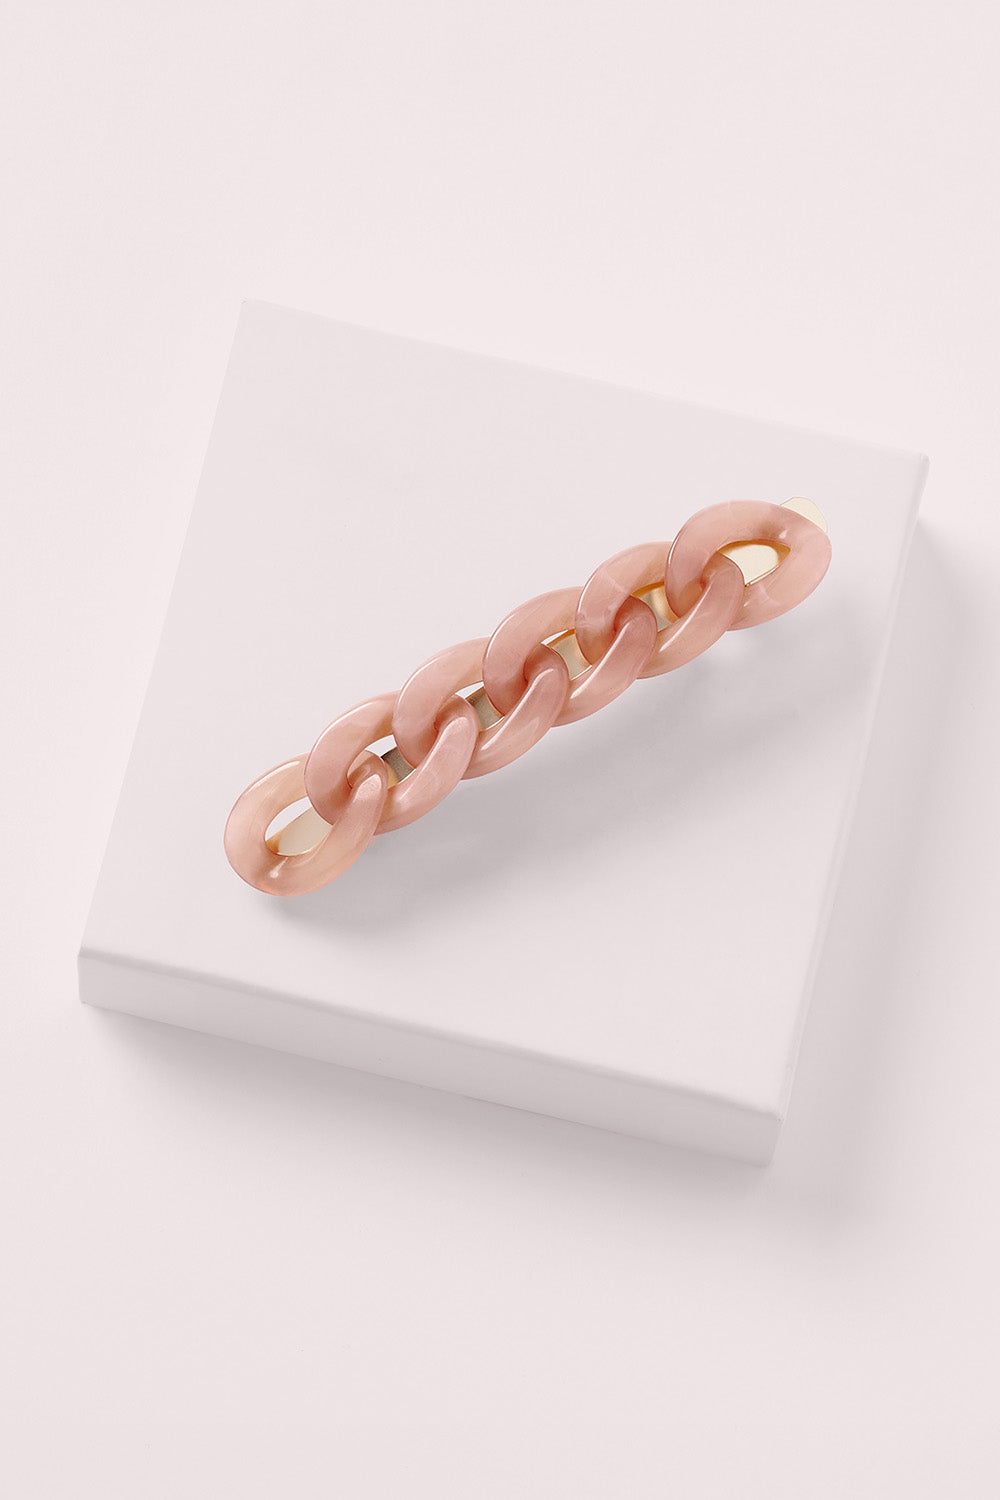 cable baguette barrette in champagne marble on white box